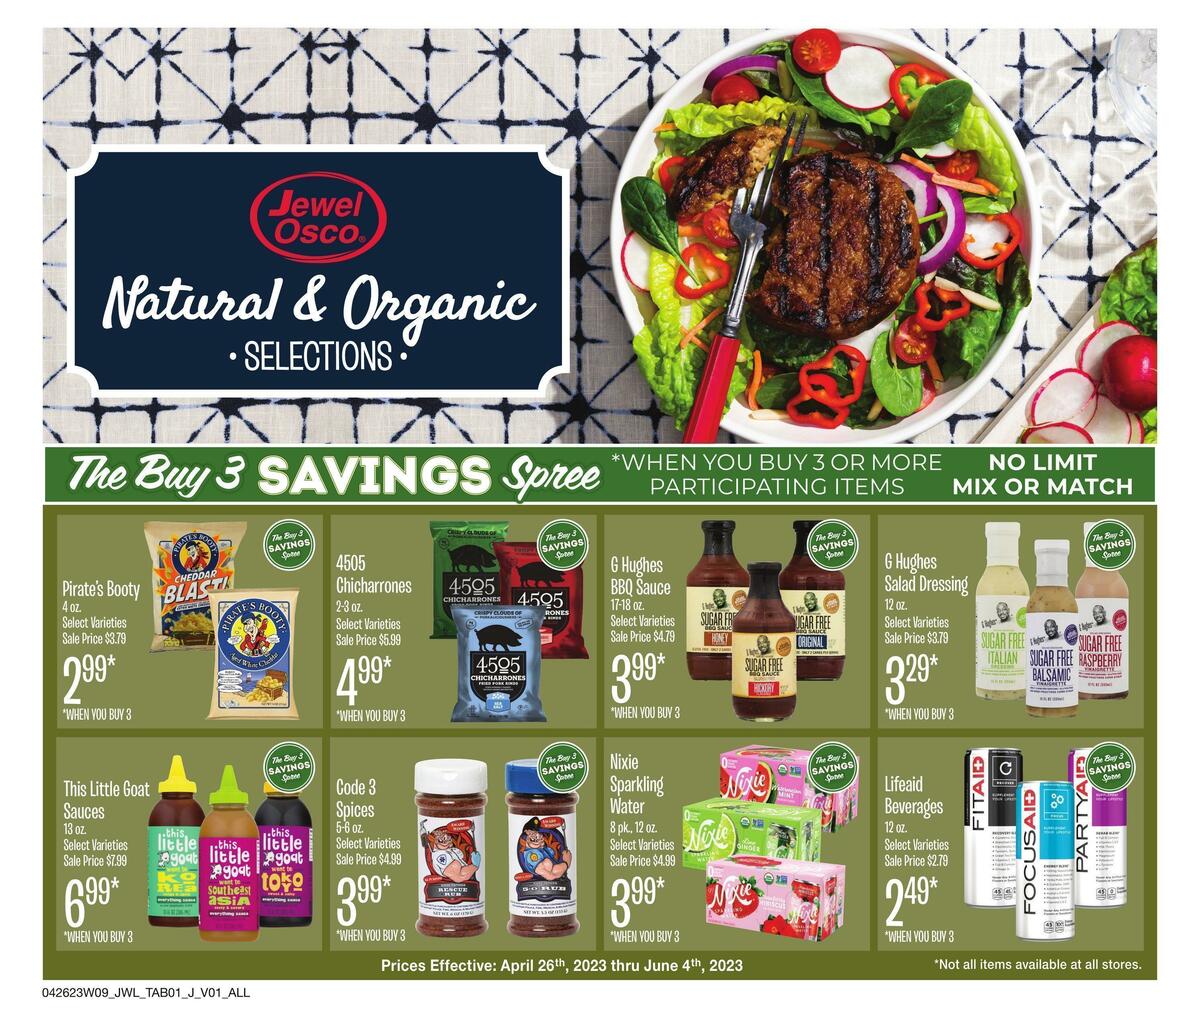 Jewel Osco Natural & Organic Weekly Ad from April 26